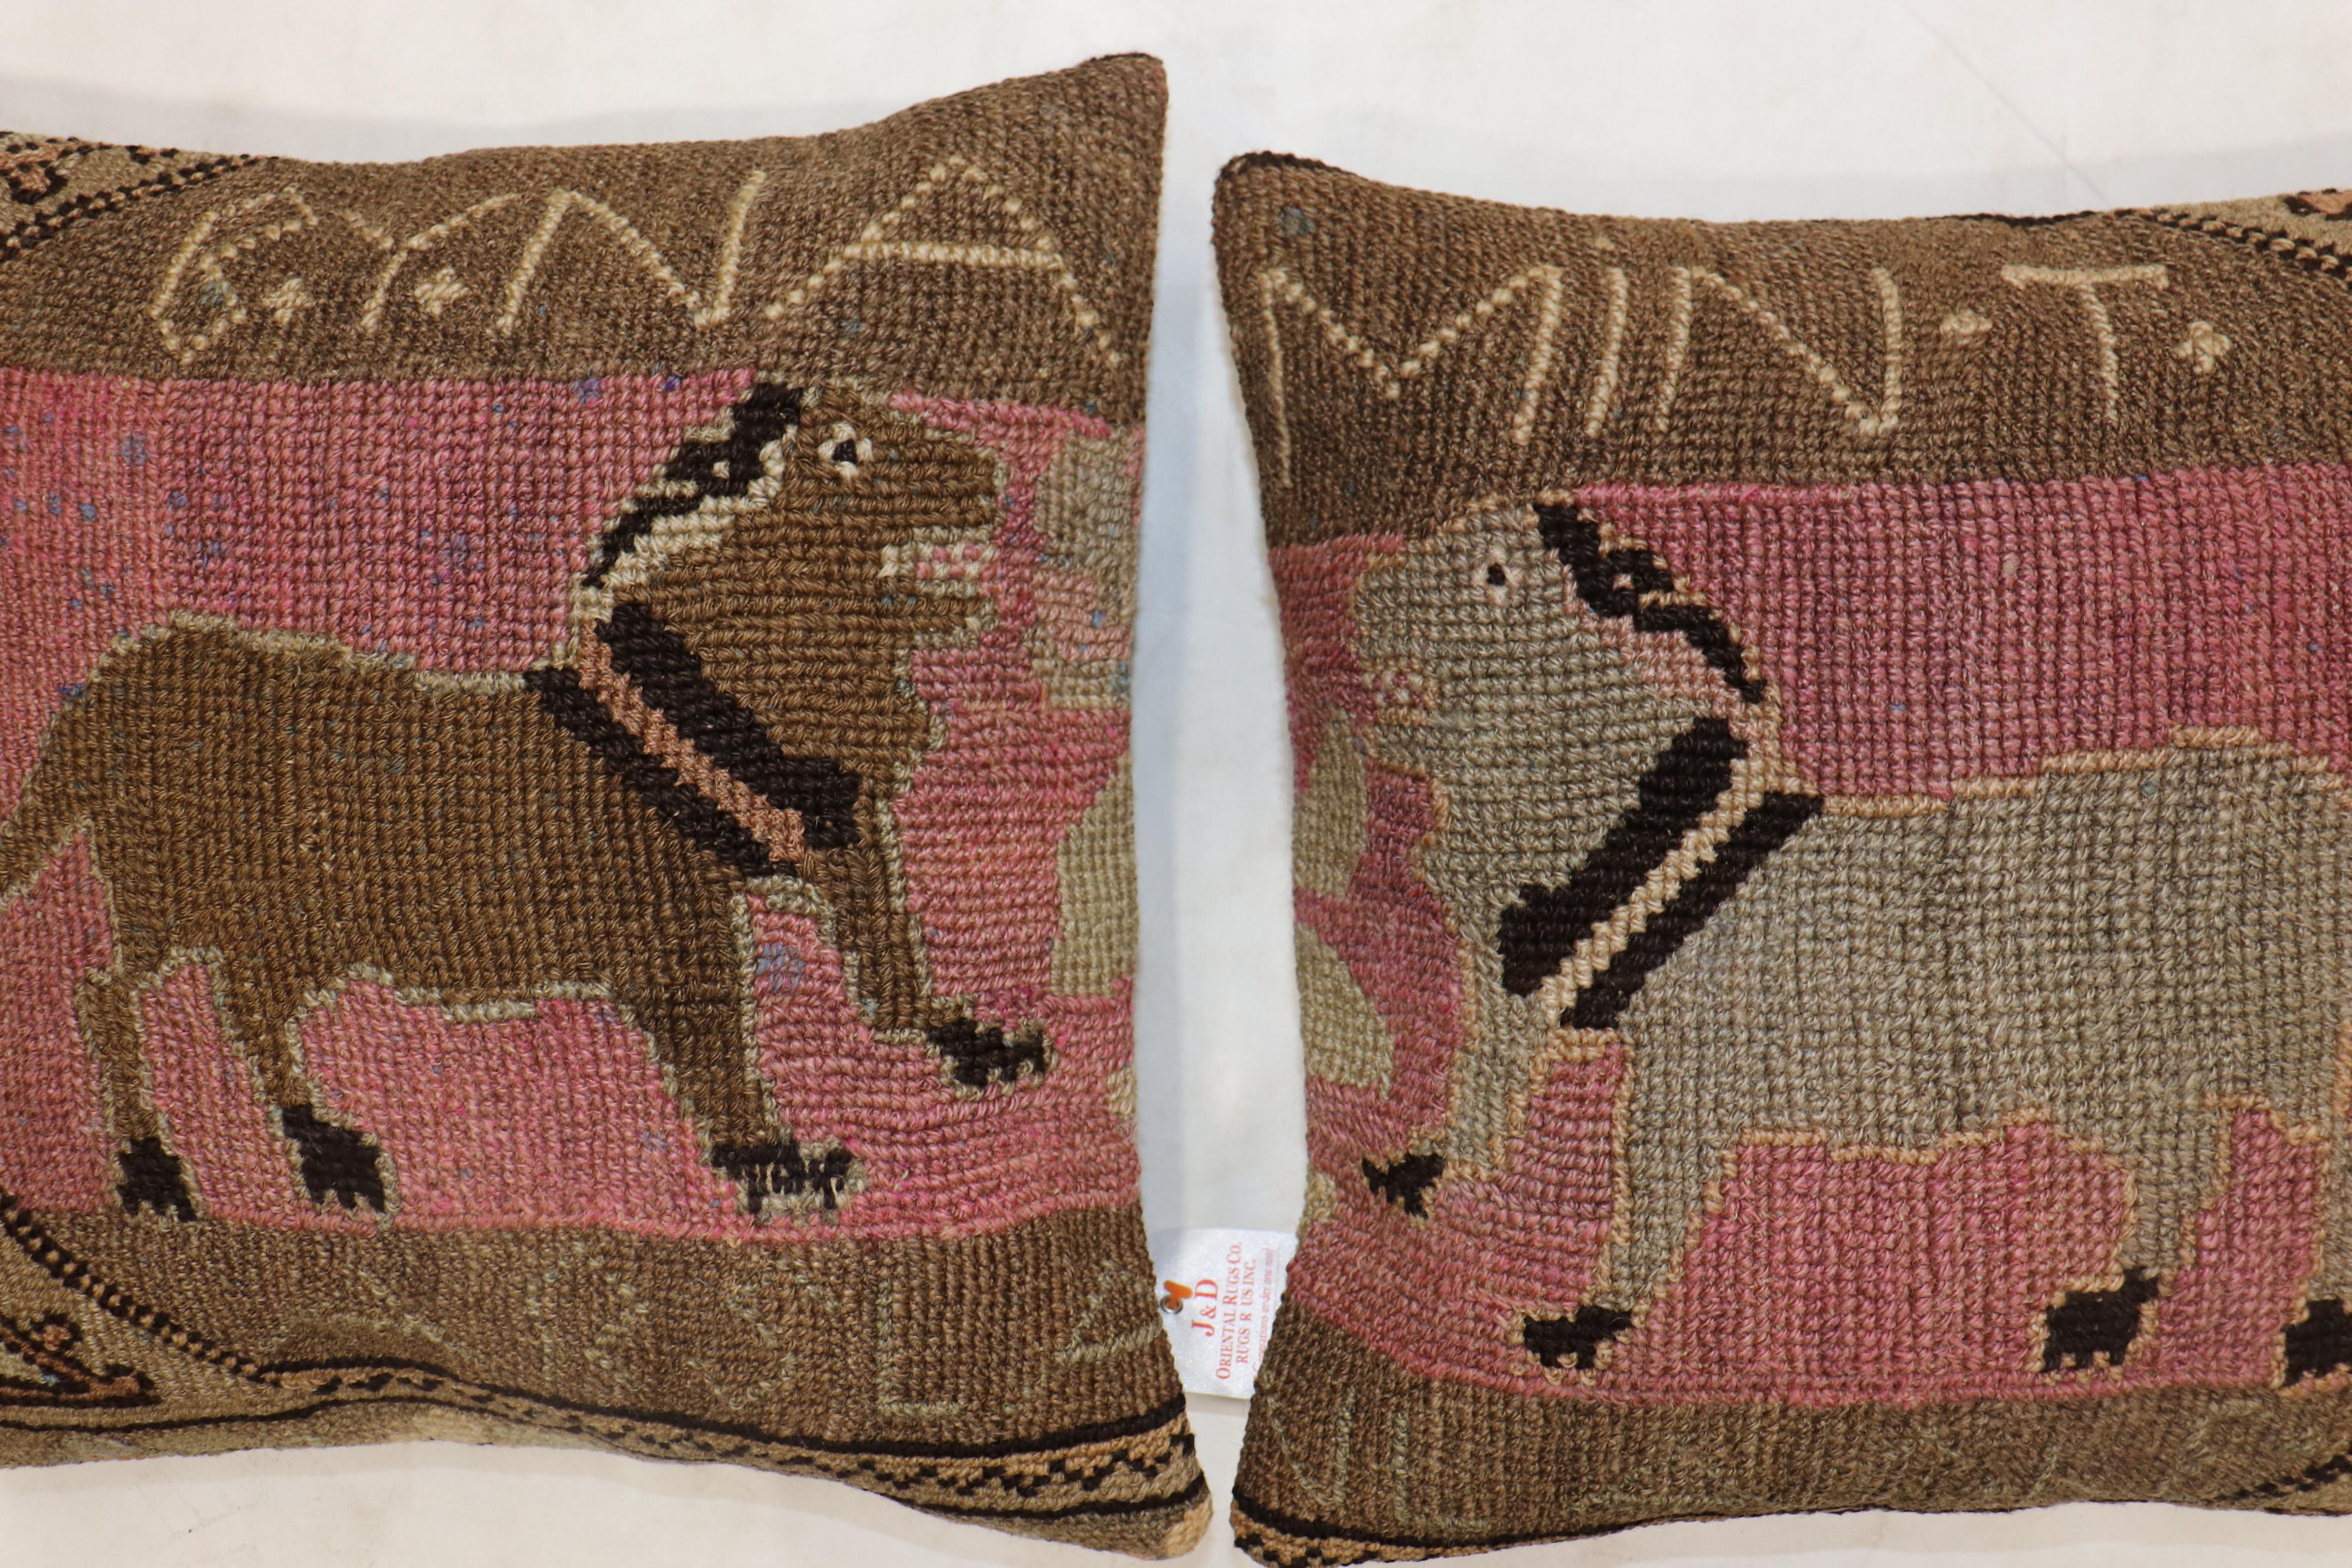 Set of pillows made from a mid-20th century Turkish wool rug depicting 2 dogs. There are Turkish names of each dog inscribed on each pillow. Probably given as a gift.

Measuring: 16” x 16” respectively.